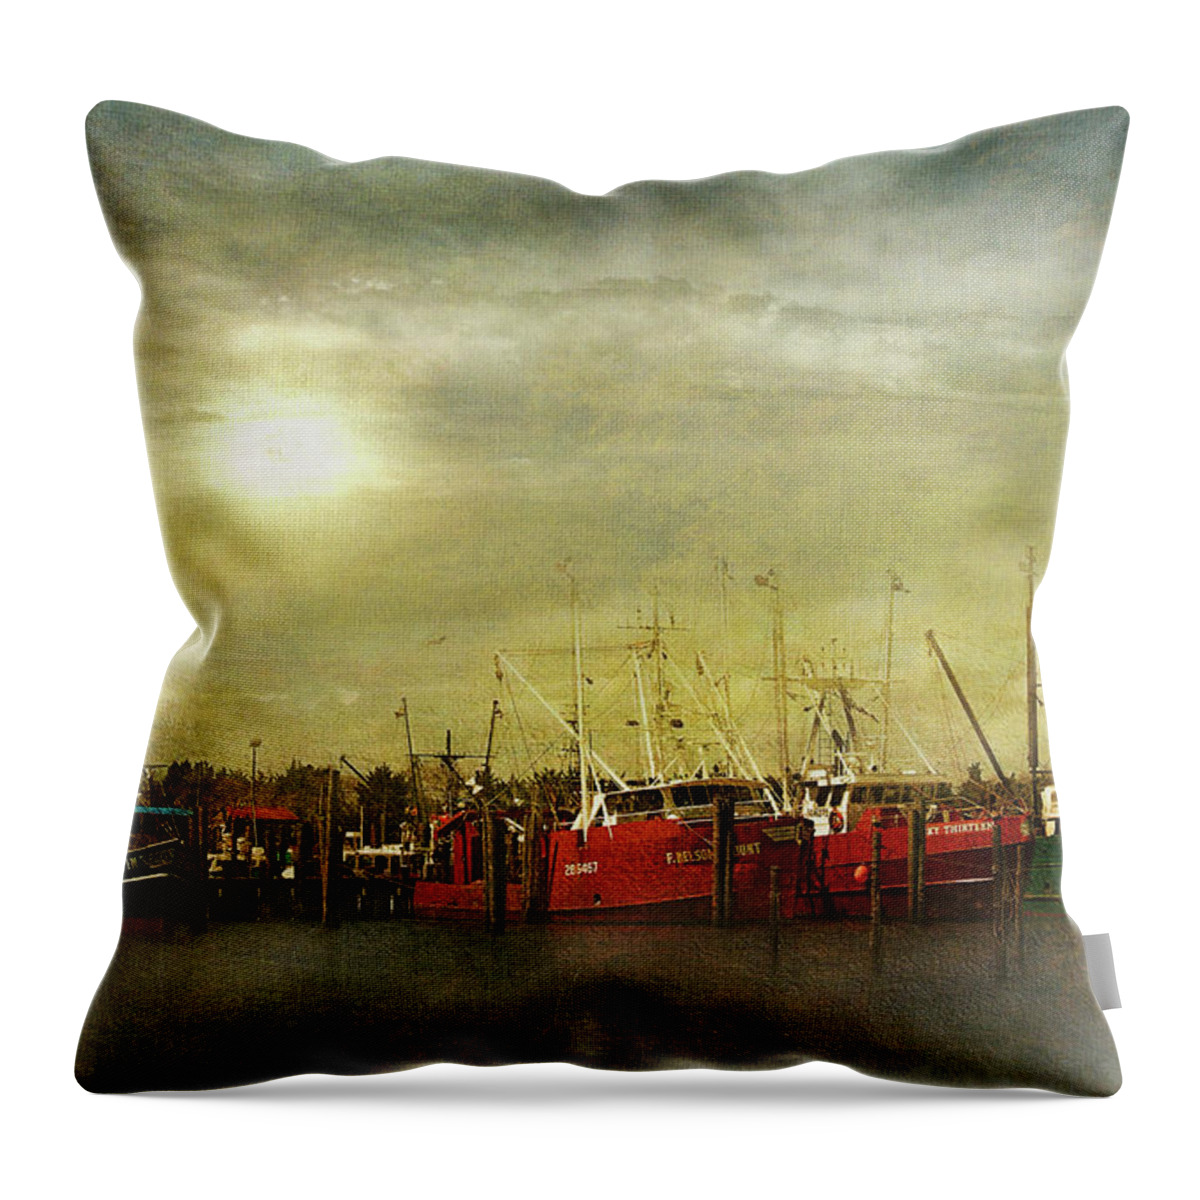 Dock Throw Pillow featuring the photograph Docked by John Rivera